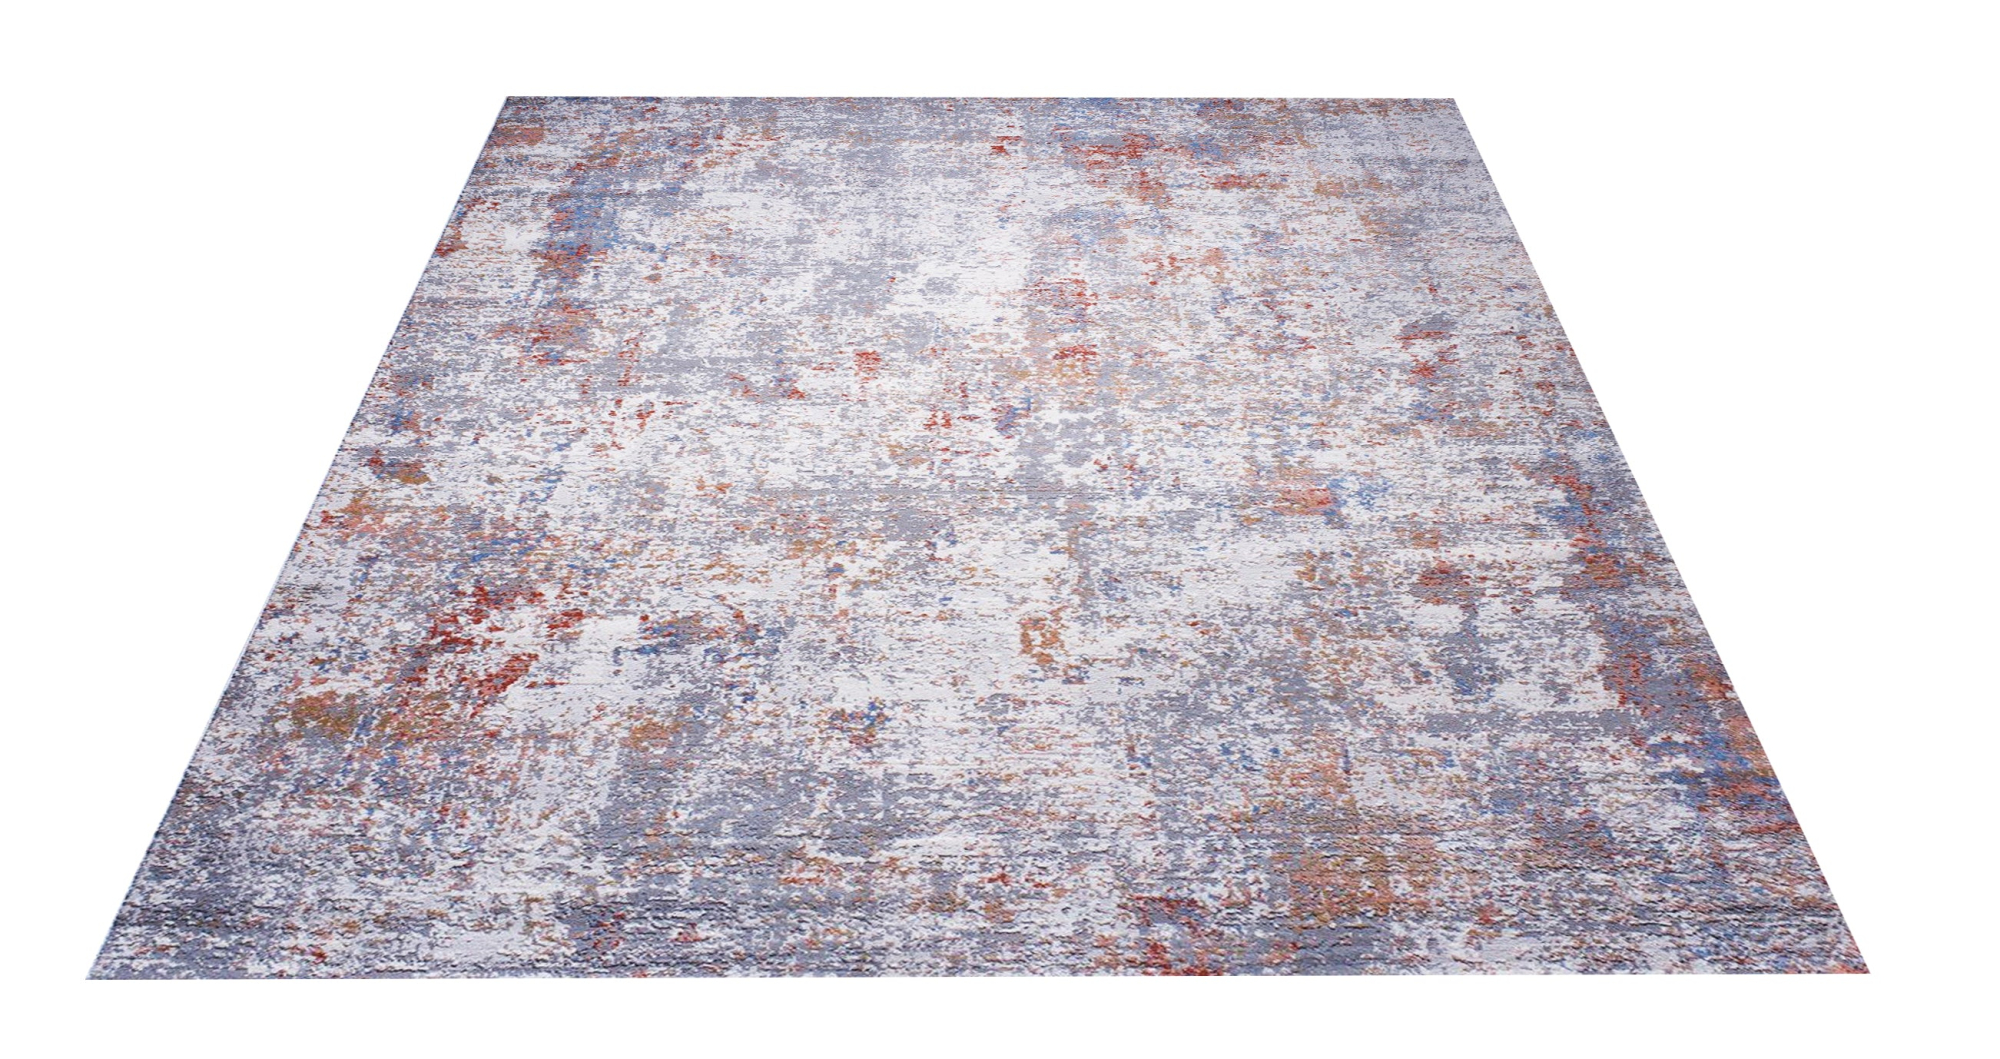 Outremont Peach Woven Rug-Area rug for living room, dining area, and bedroom